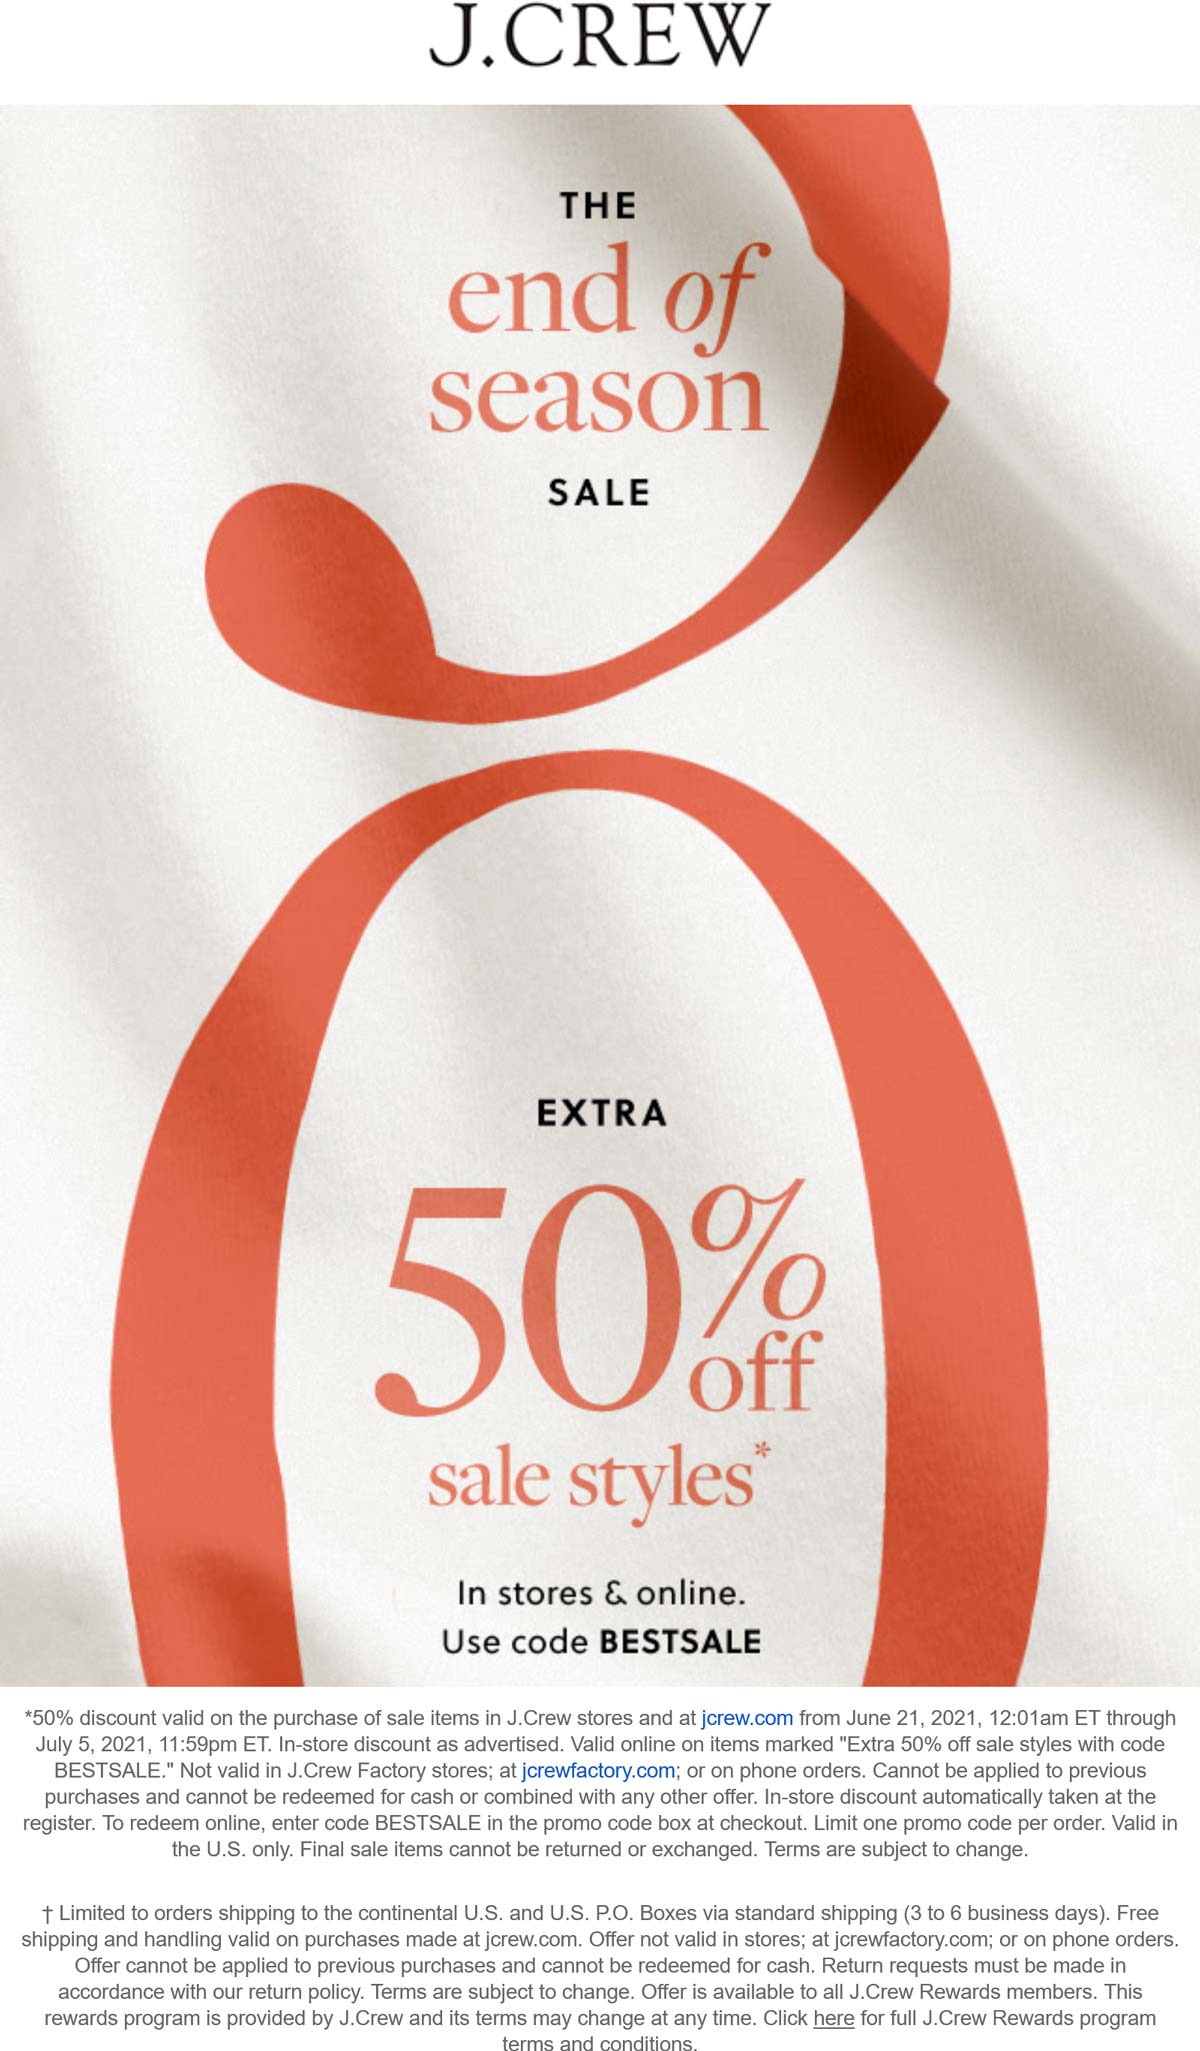 J.Crew stores Coupon  Extra 50% off sale styles at J.Crew, or online via promo code BESTSALE #jcrew 